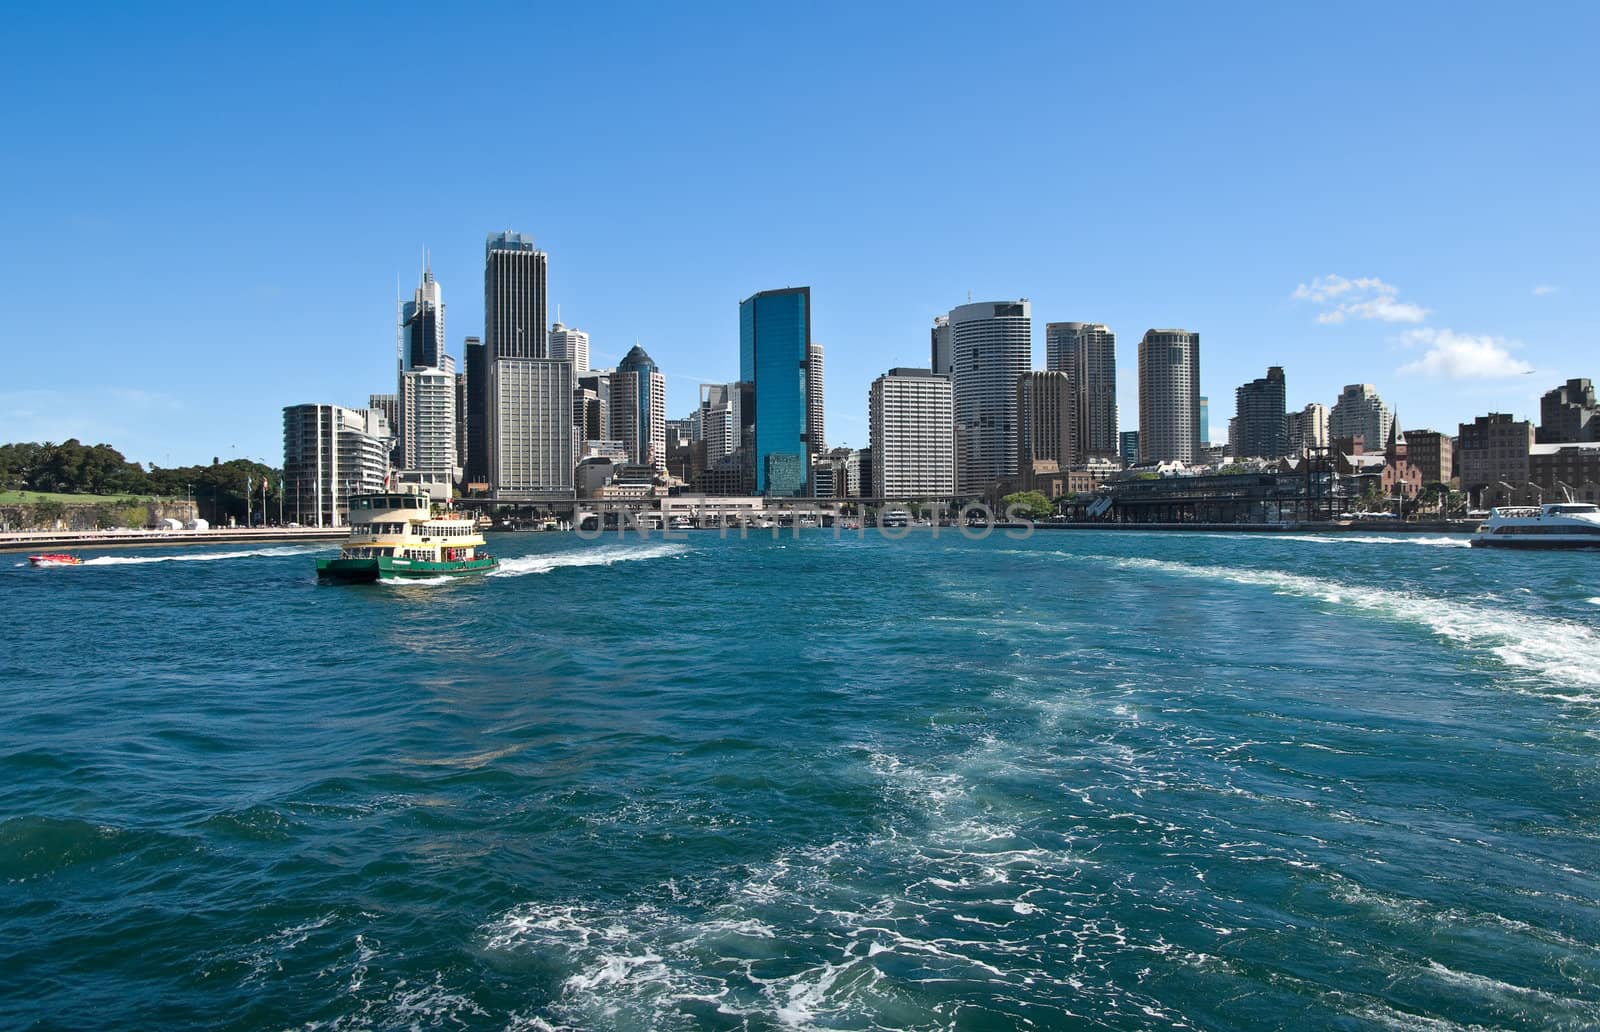 sailing into sydney by clearviewstock